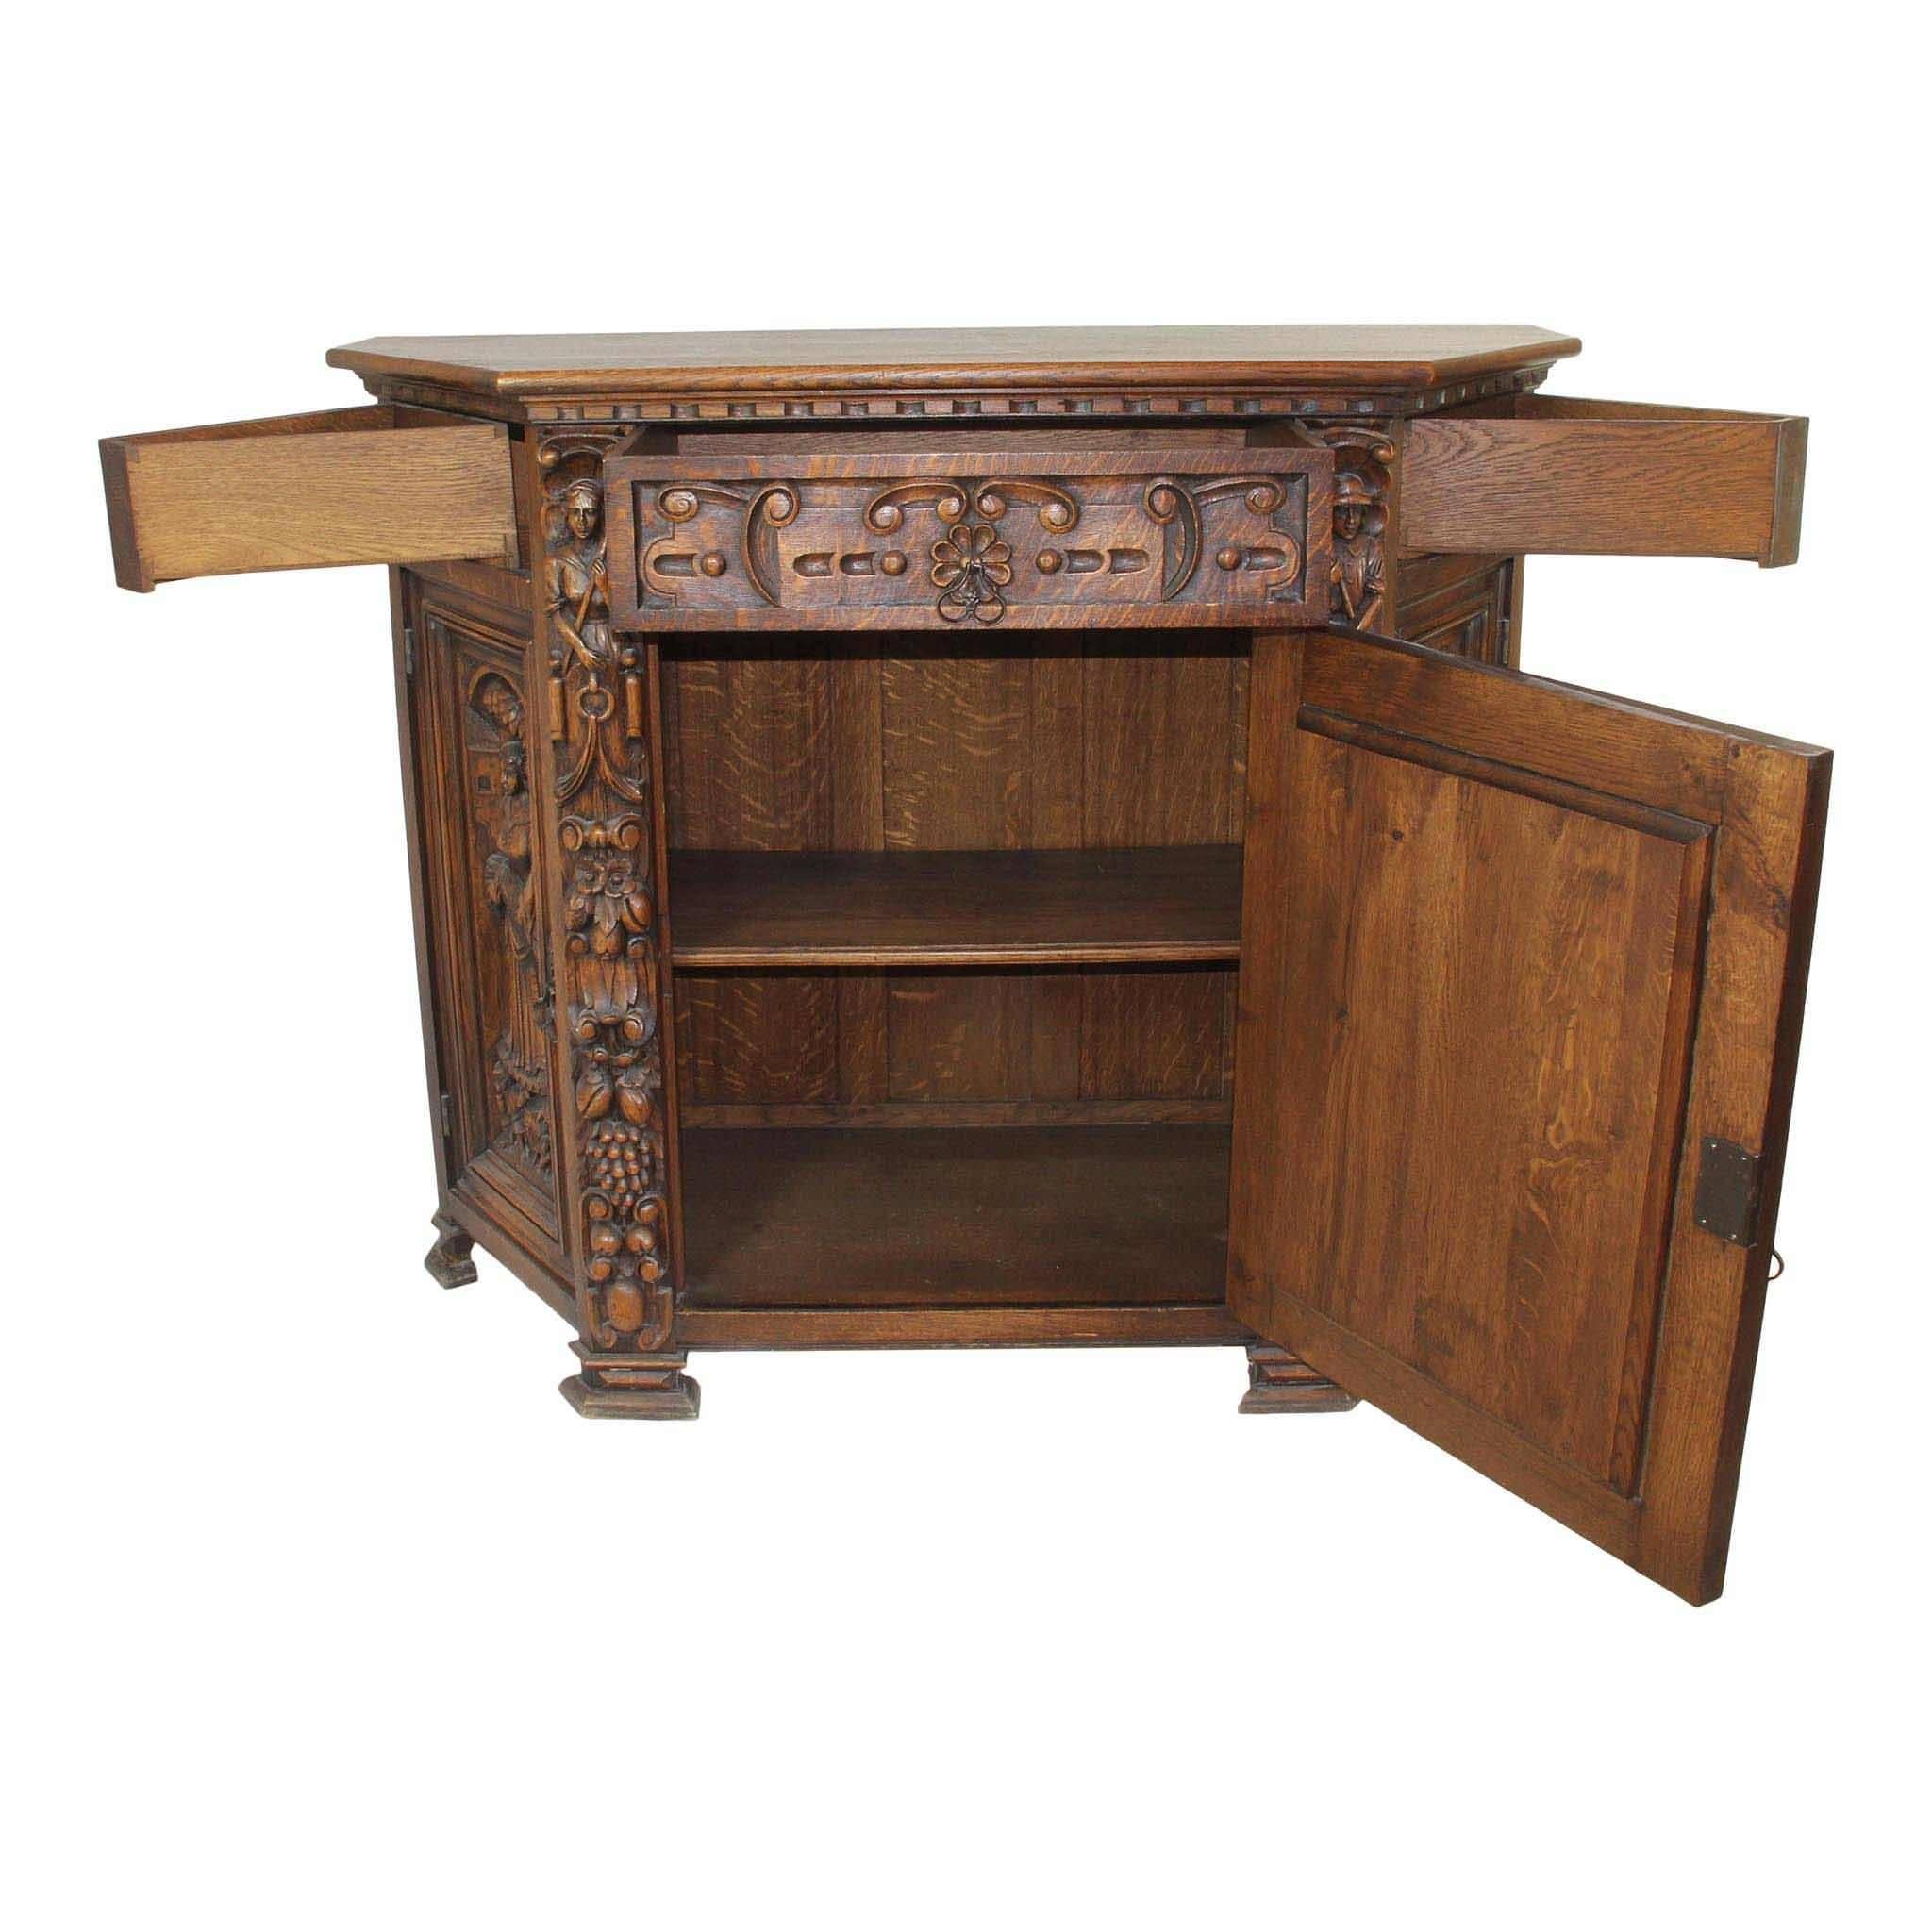 20th Century Dutch Carved Server or Cabinet, circa 1915